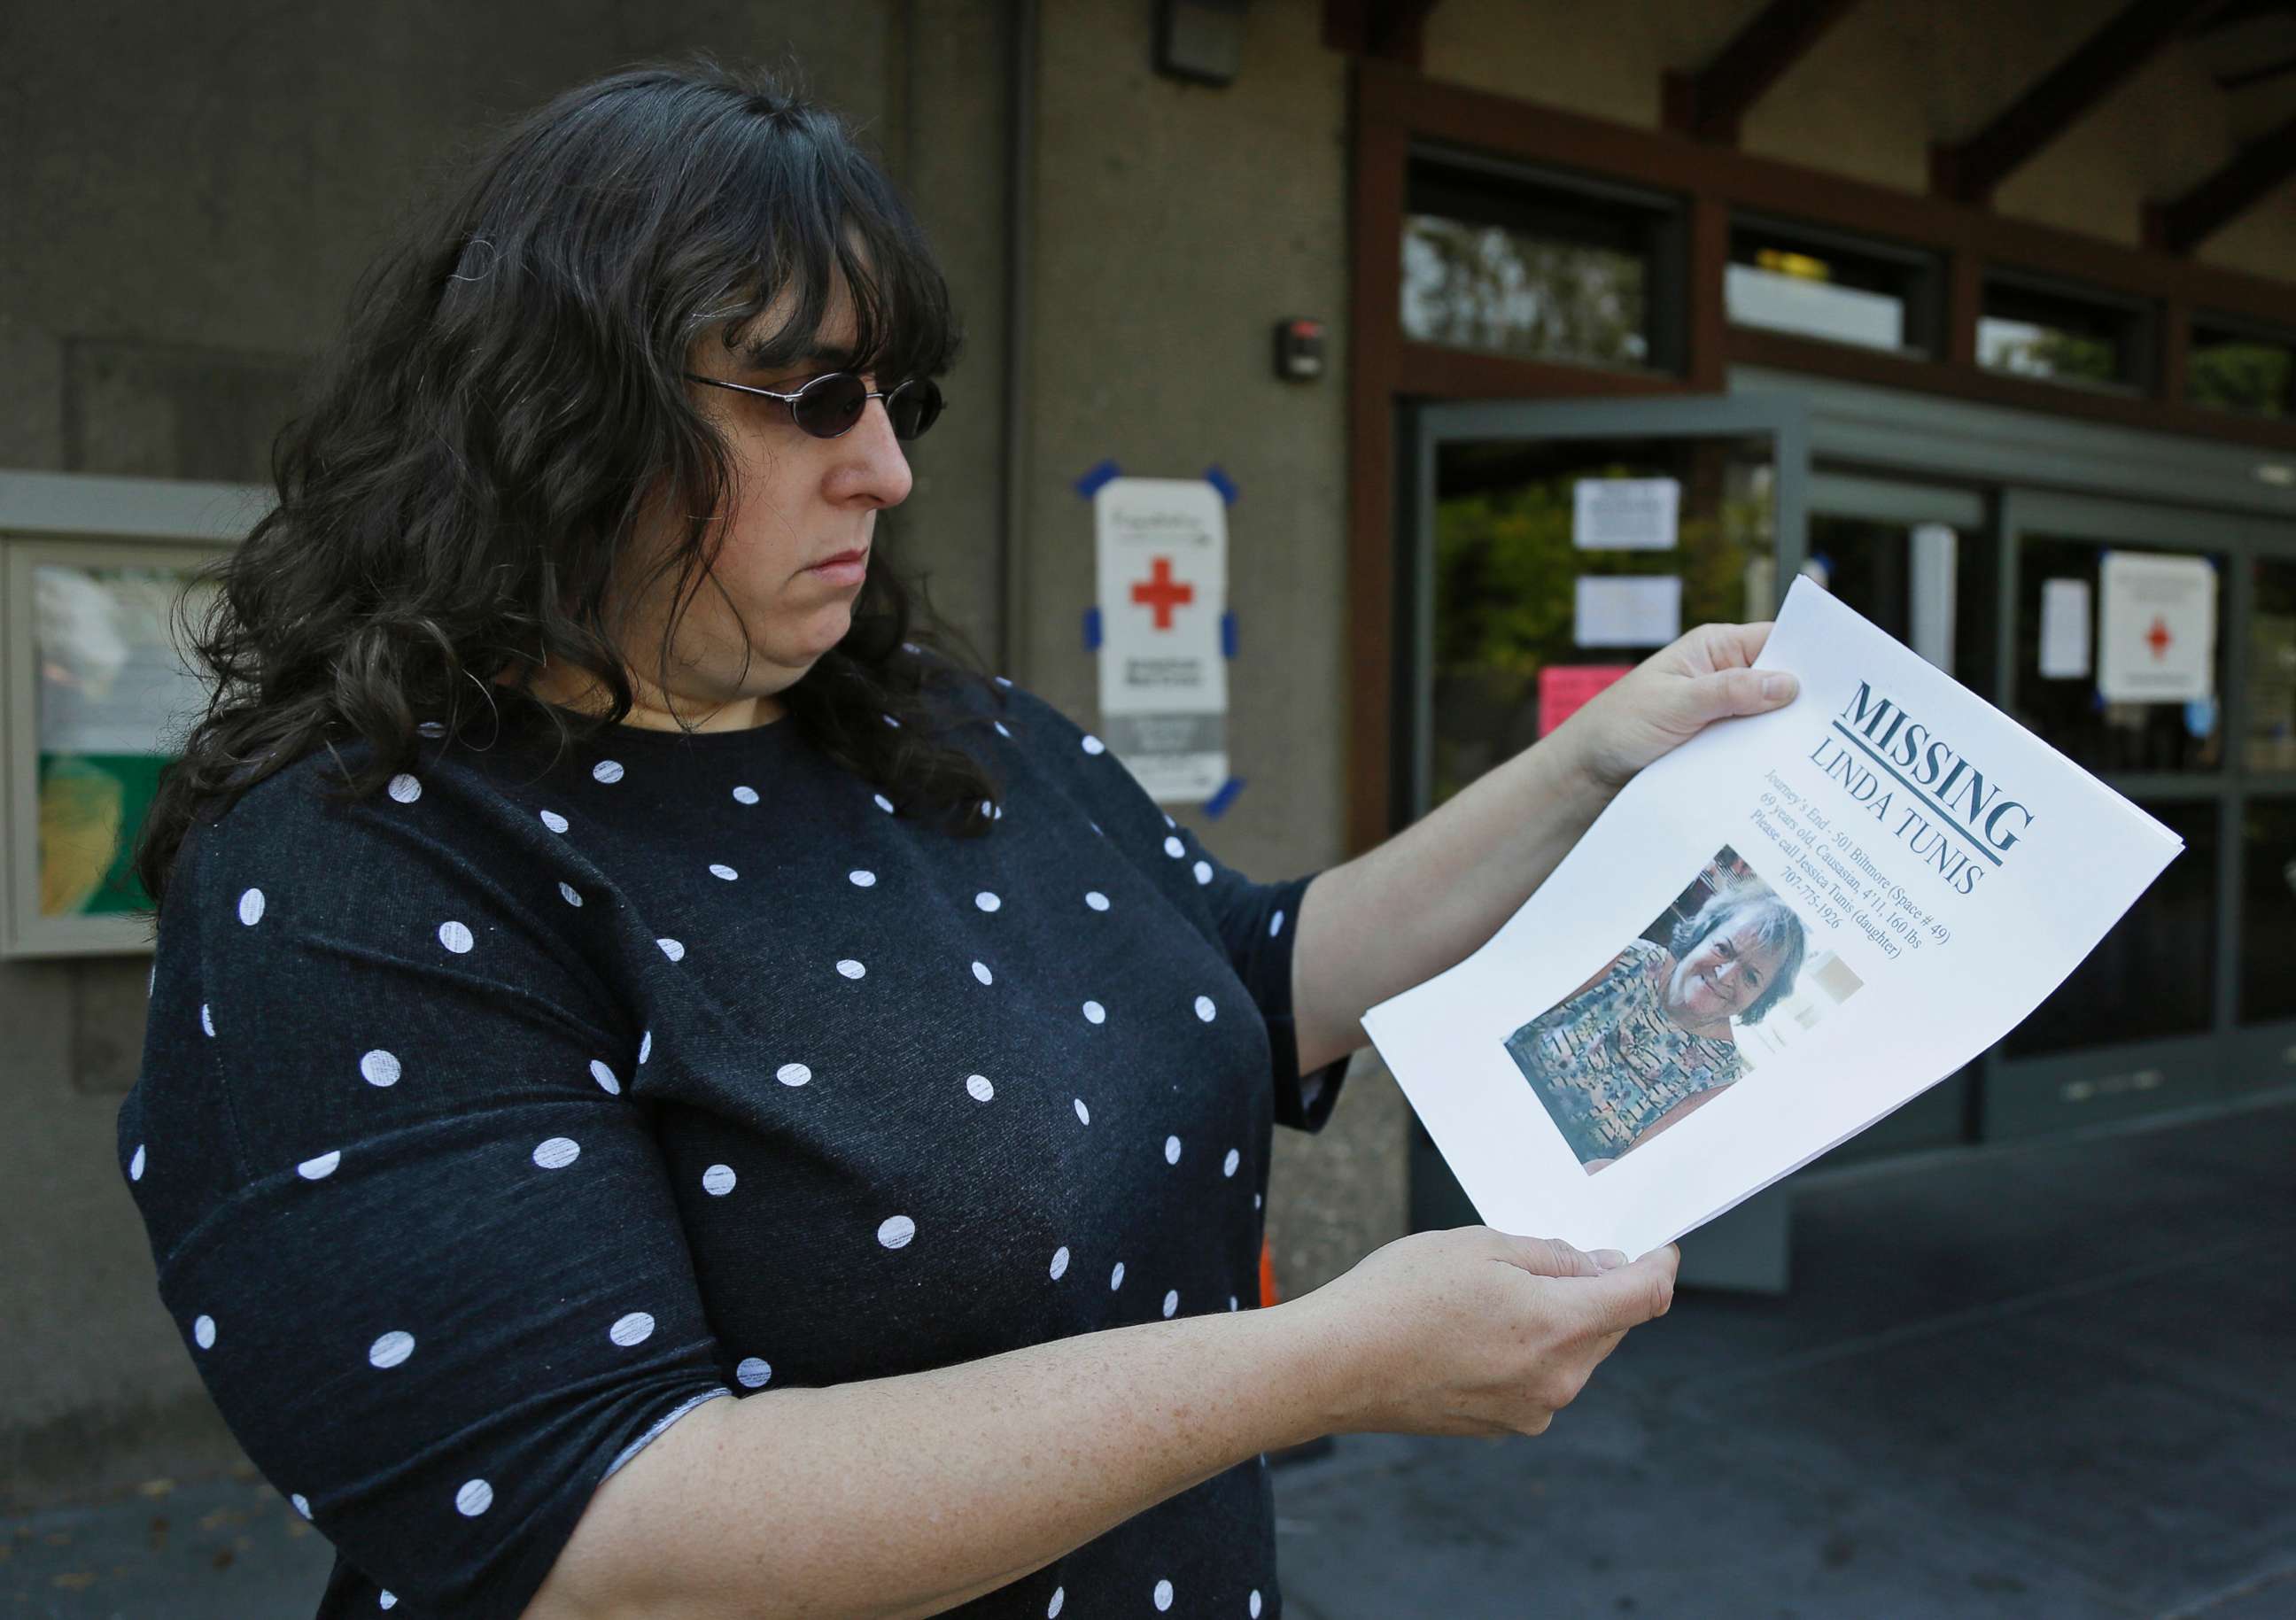 PHOTO: Jessica Tunis stands outside a Red Cross evacuation center and holds a flyer about her missing mother, Oct. 11, 2017, in Santa Rosa, Calif.